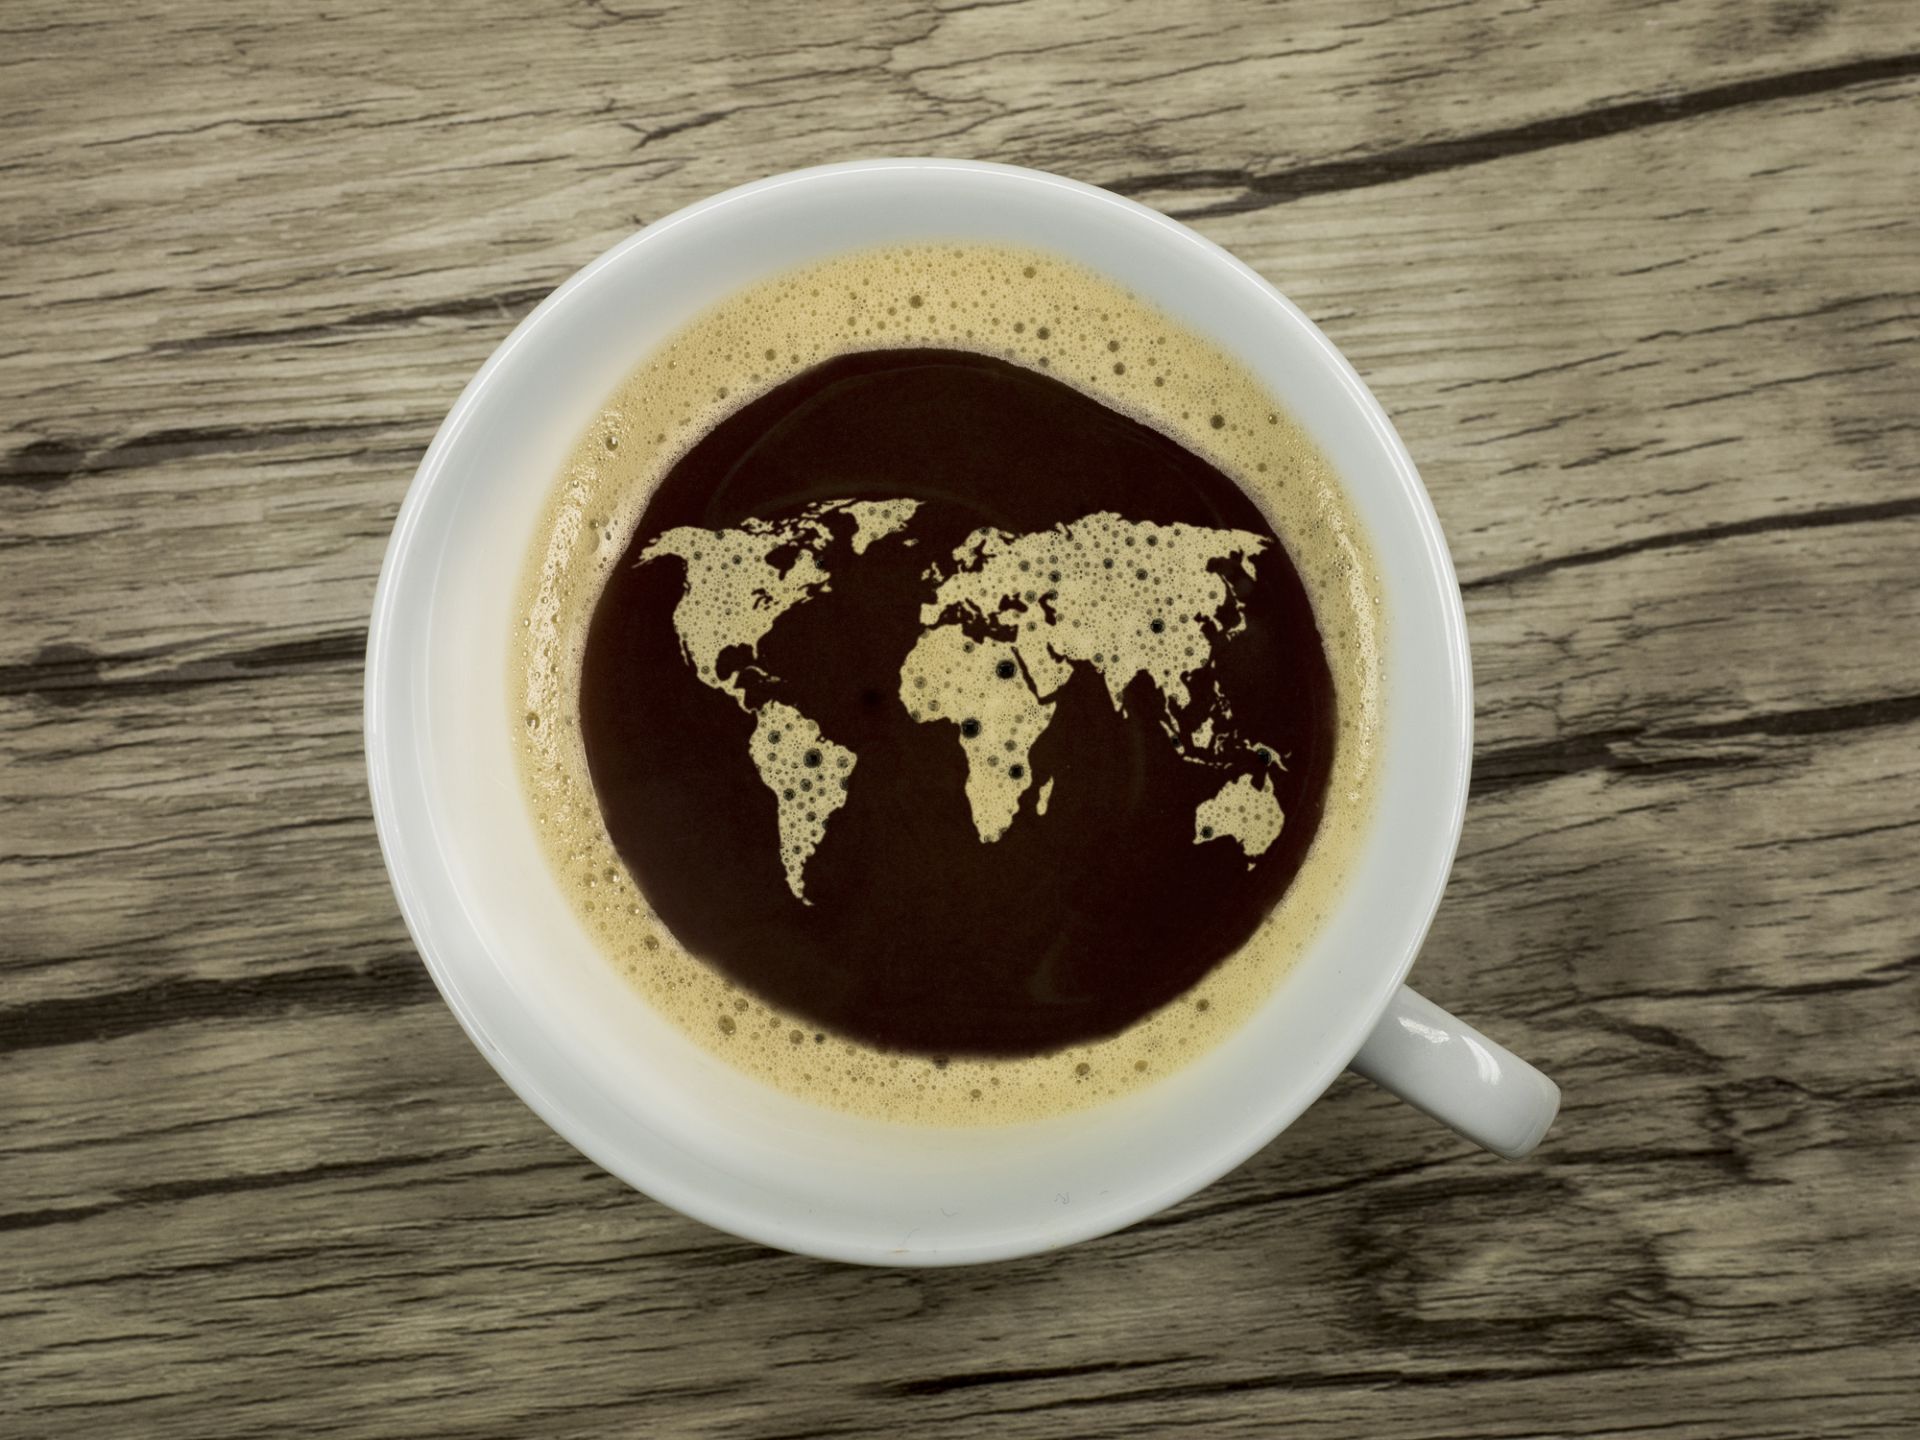 A cup of coffee with a world map as latte art